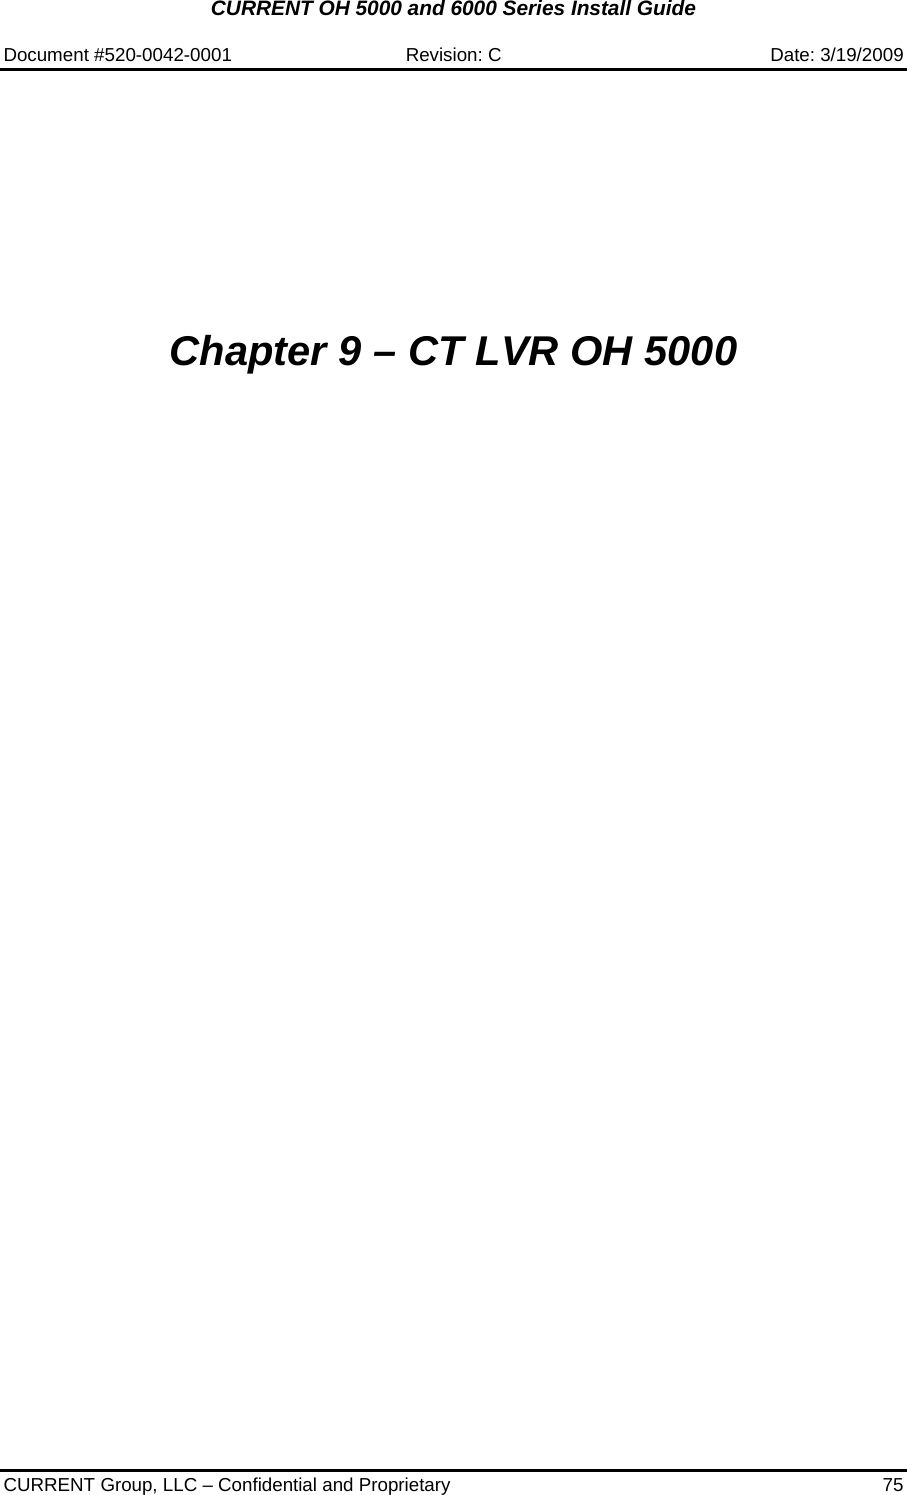 CURRENT OH 5000 and 6000 Series Install Guide  Document #520-0042-0001  Revision: C  Date: 3/19/2009  CURRENT Group, LLC – Confidential and Proprietary  75            Chapter 9 – CT LVR OH 5000                                 